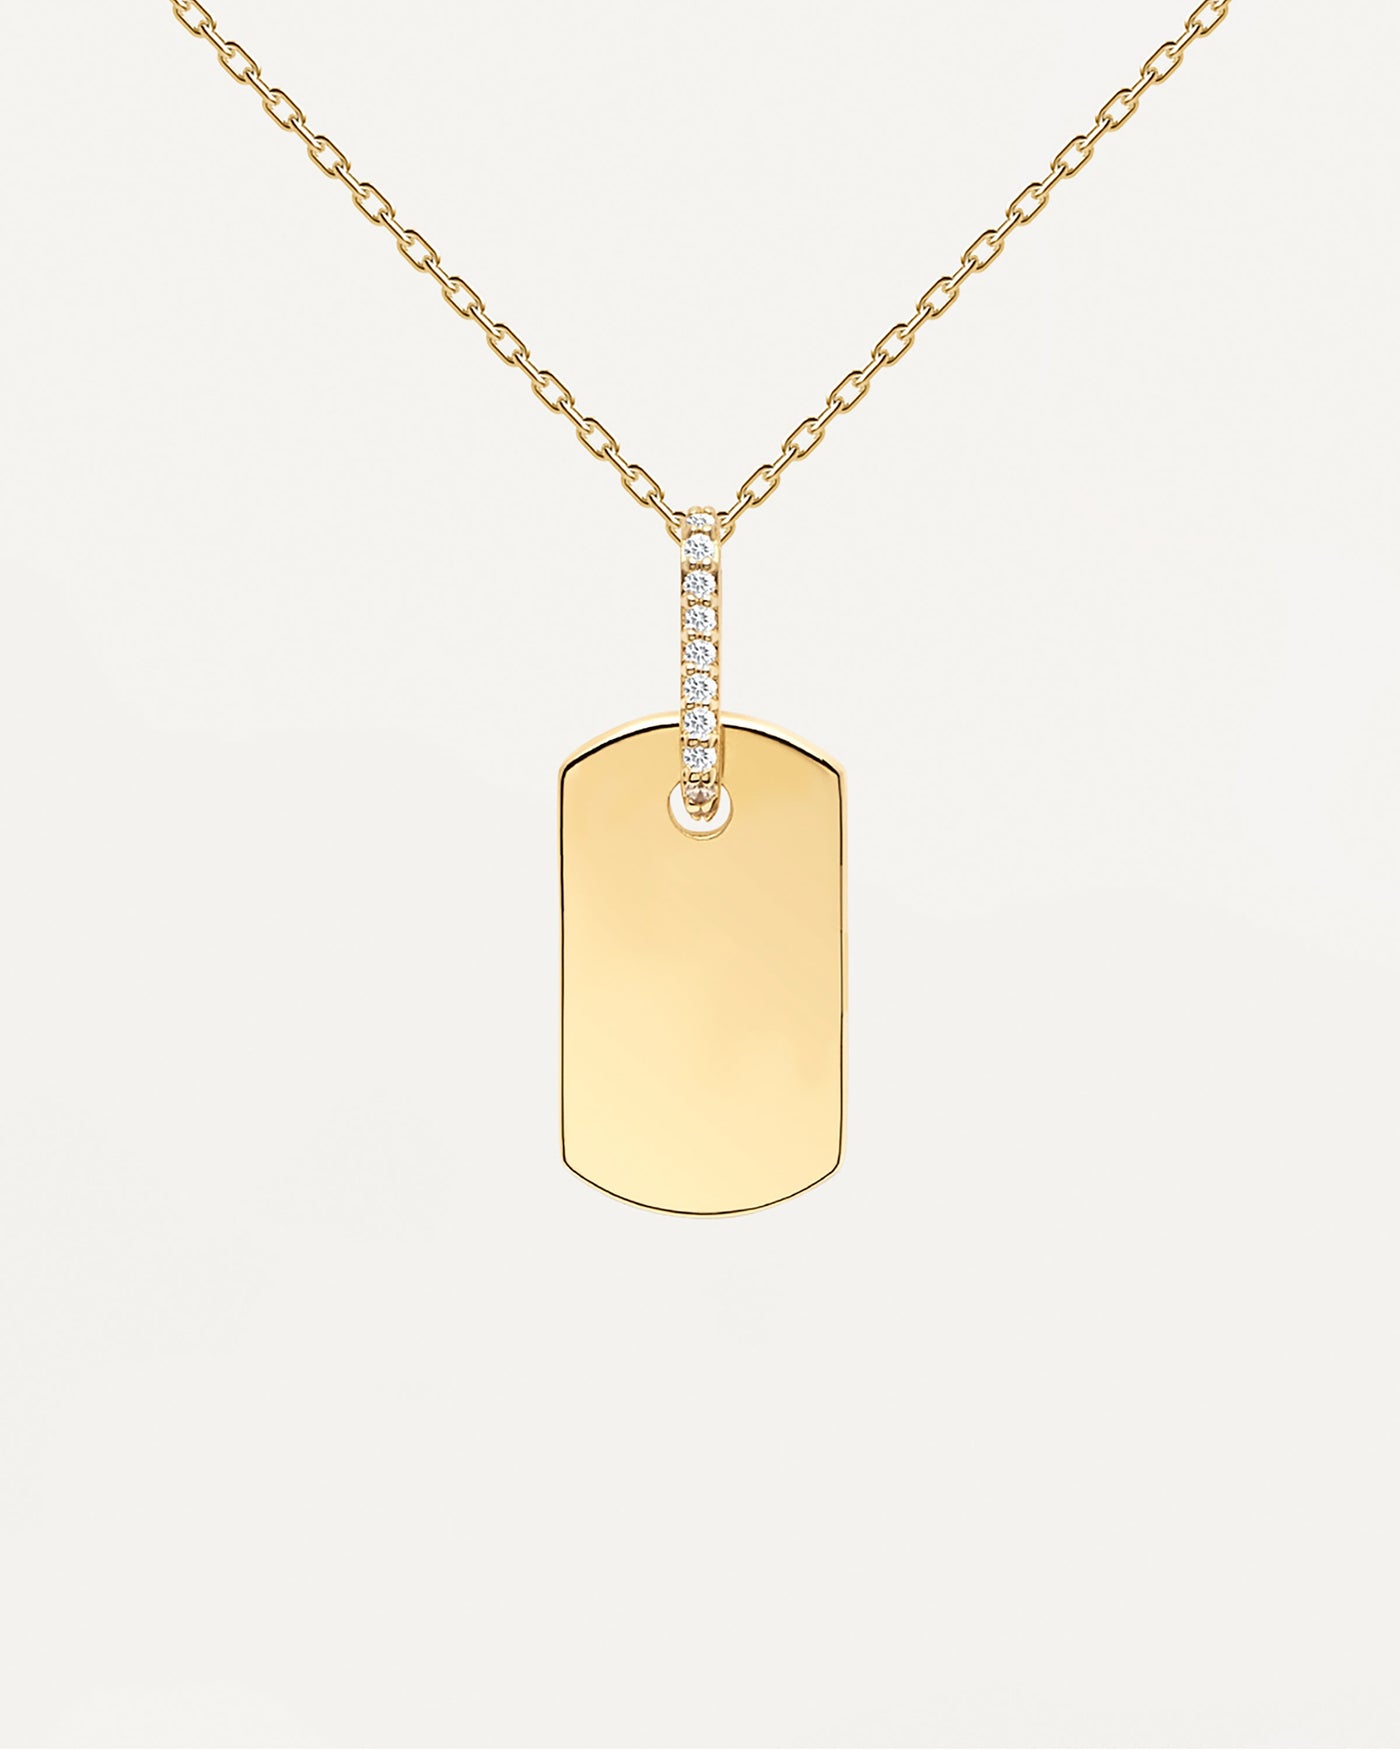 2023 Selection | Talisman Necklace. Personalized necklace in gold-plated silver with engravable plate hanging from white zirconia. Get the latest arrival from PDPAOLA. Place your order safely and get this Best Seller. Free Shipping.